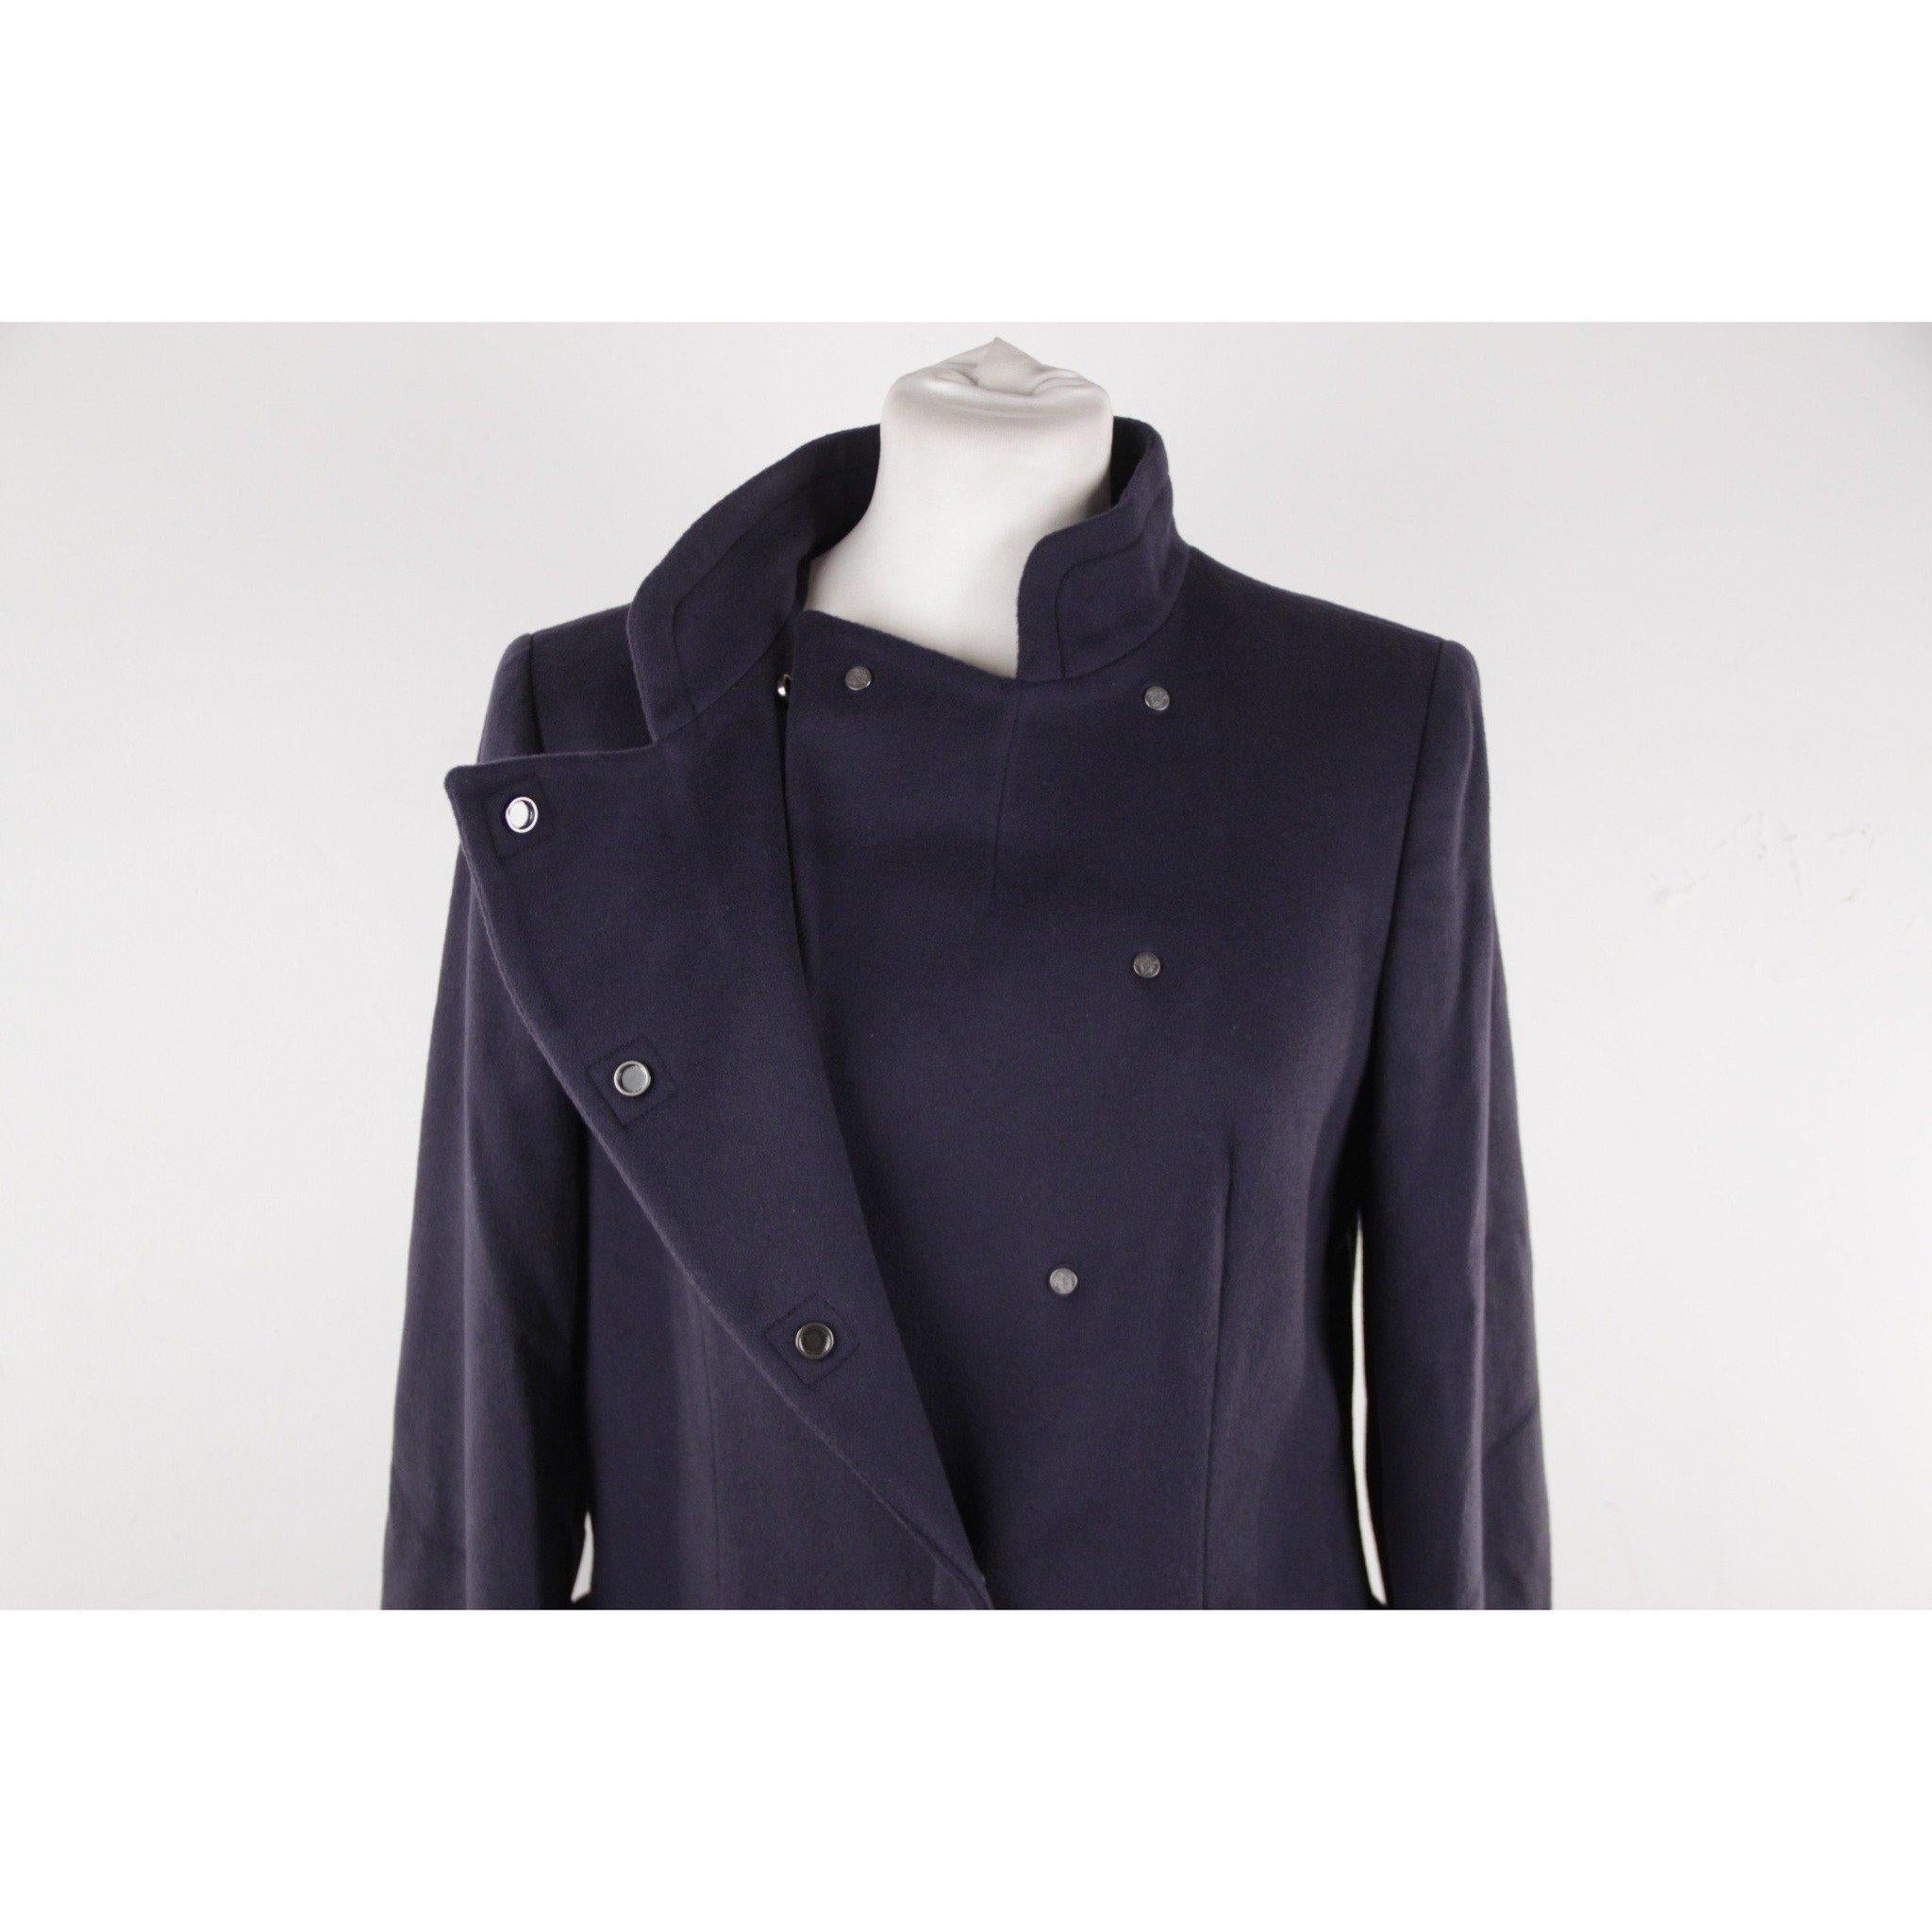 Women's Versace Blue Wool Coat 2008 Fall Winter Collection Size 40